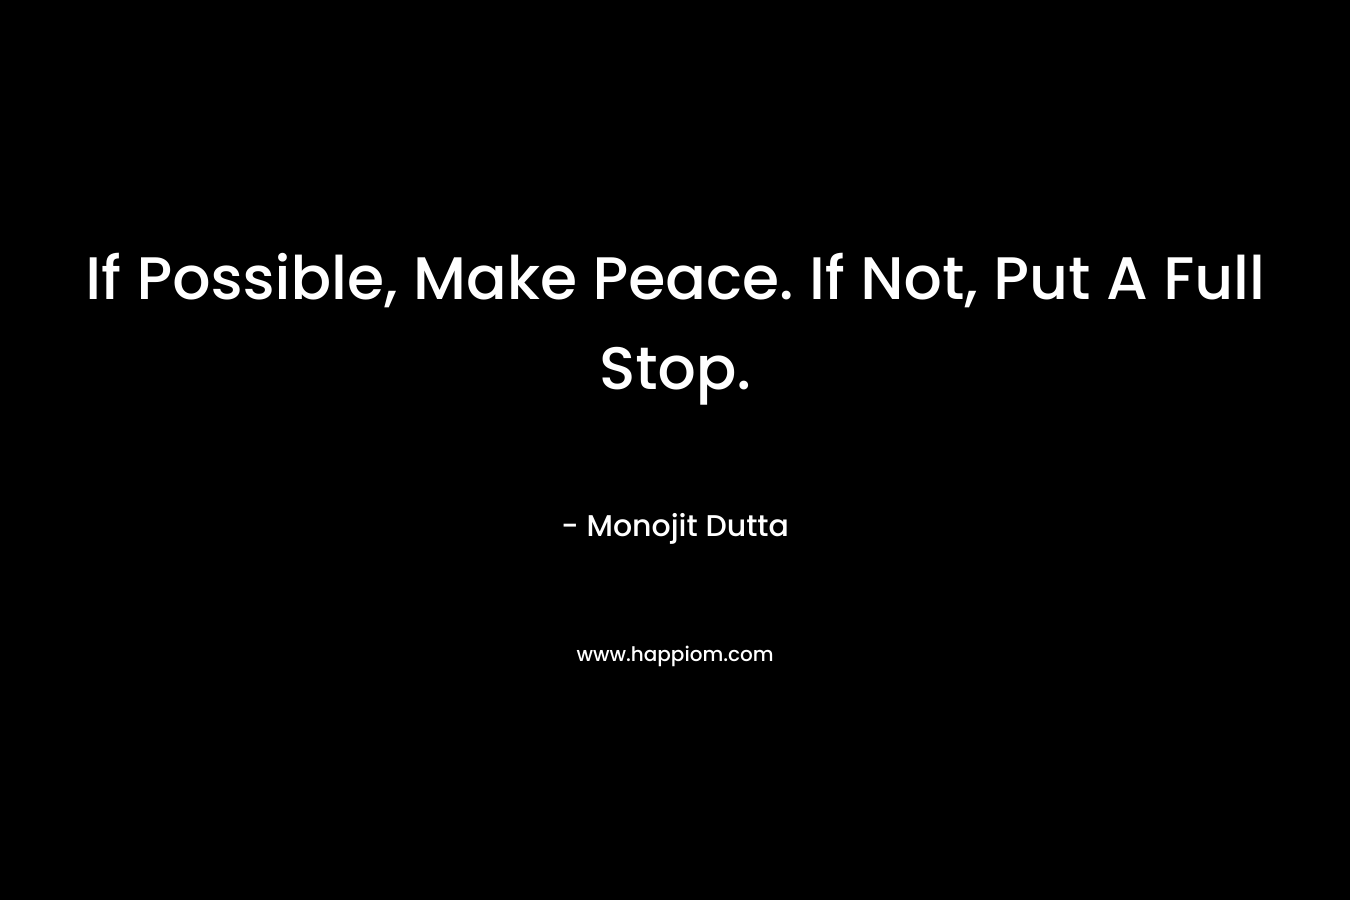 If Possible, Make Peace. If Not, Put A Full Stop.